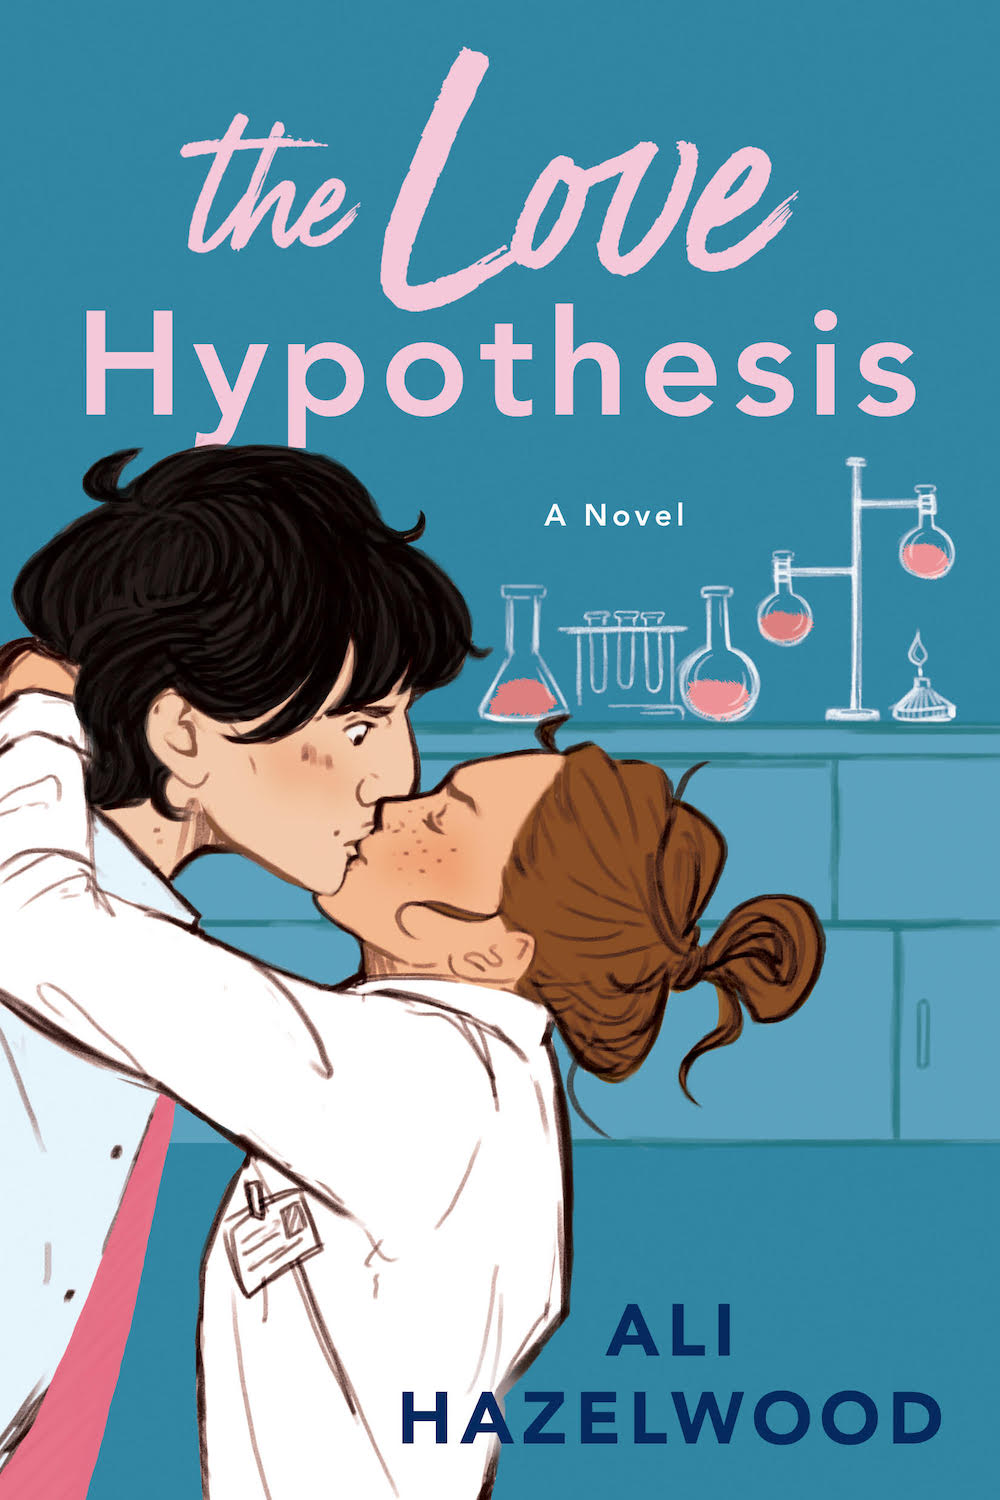 the love hypothesis characters